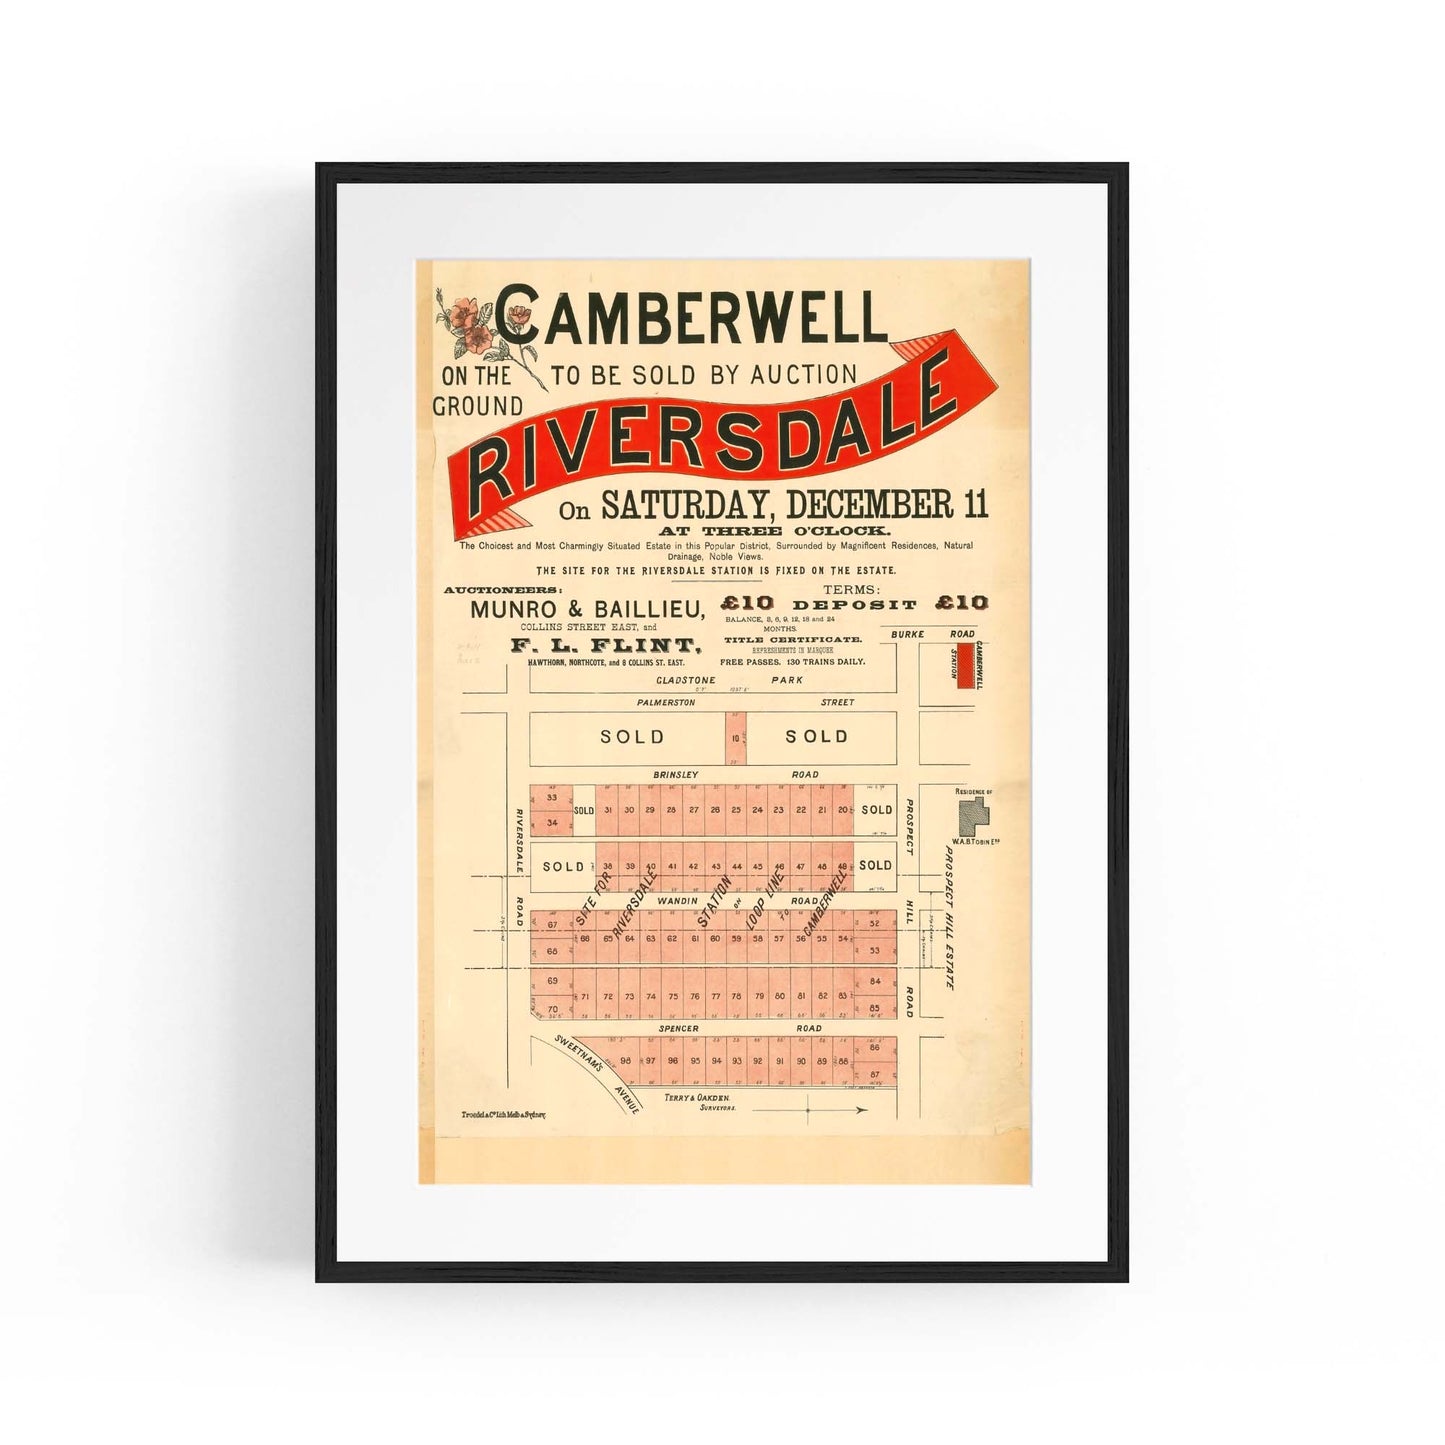 Camberwell Melbourne Vintage Real Estate Ad Art #1 - The Affordable Art Company